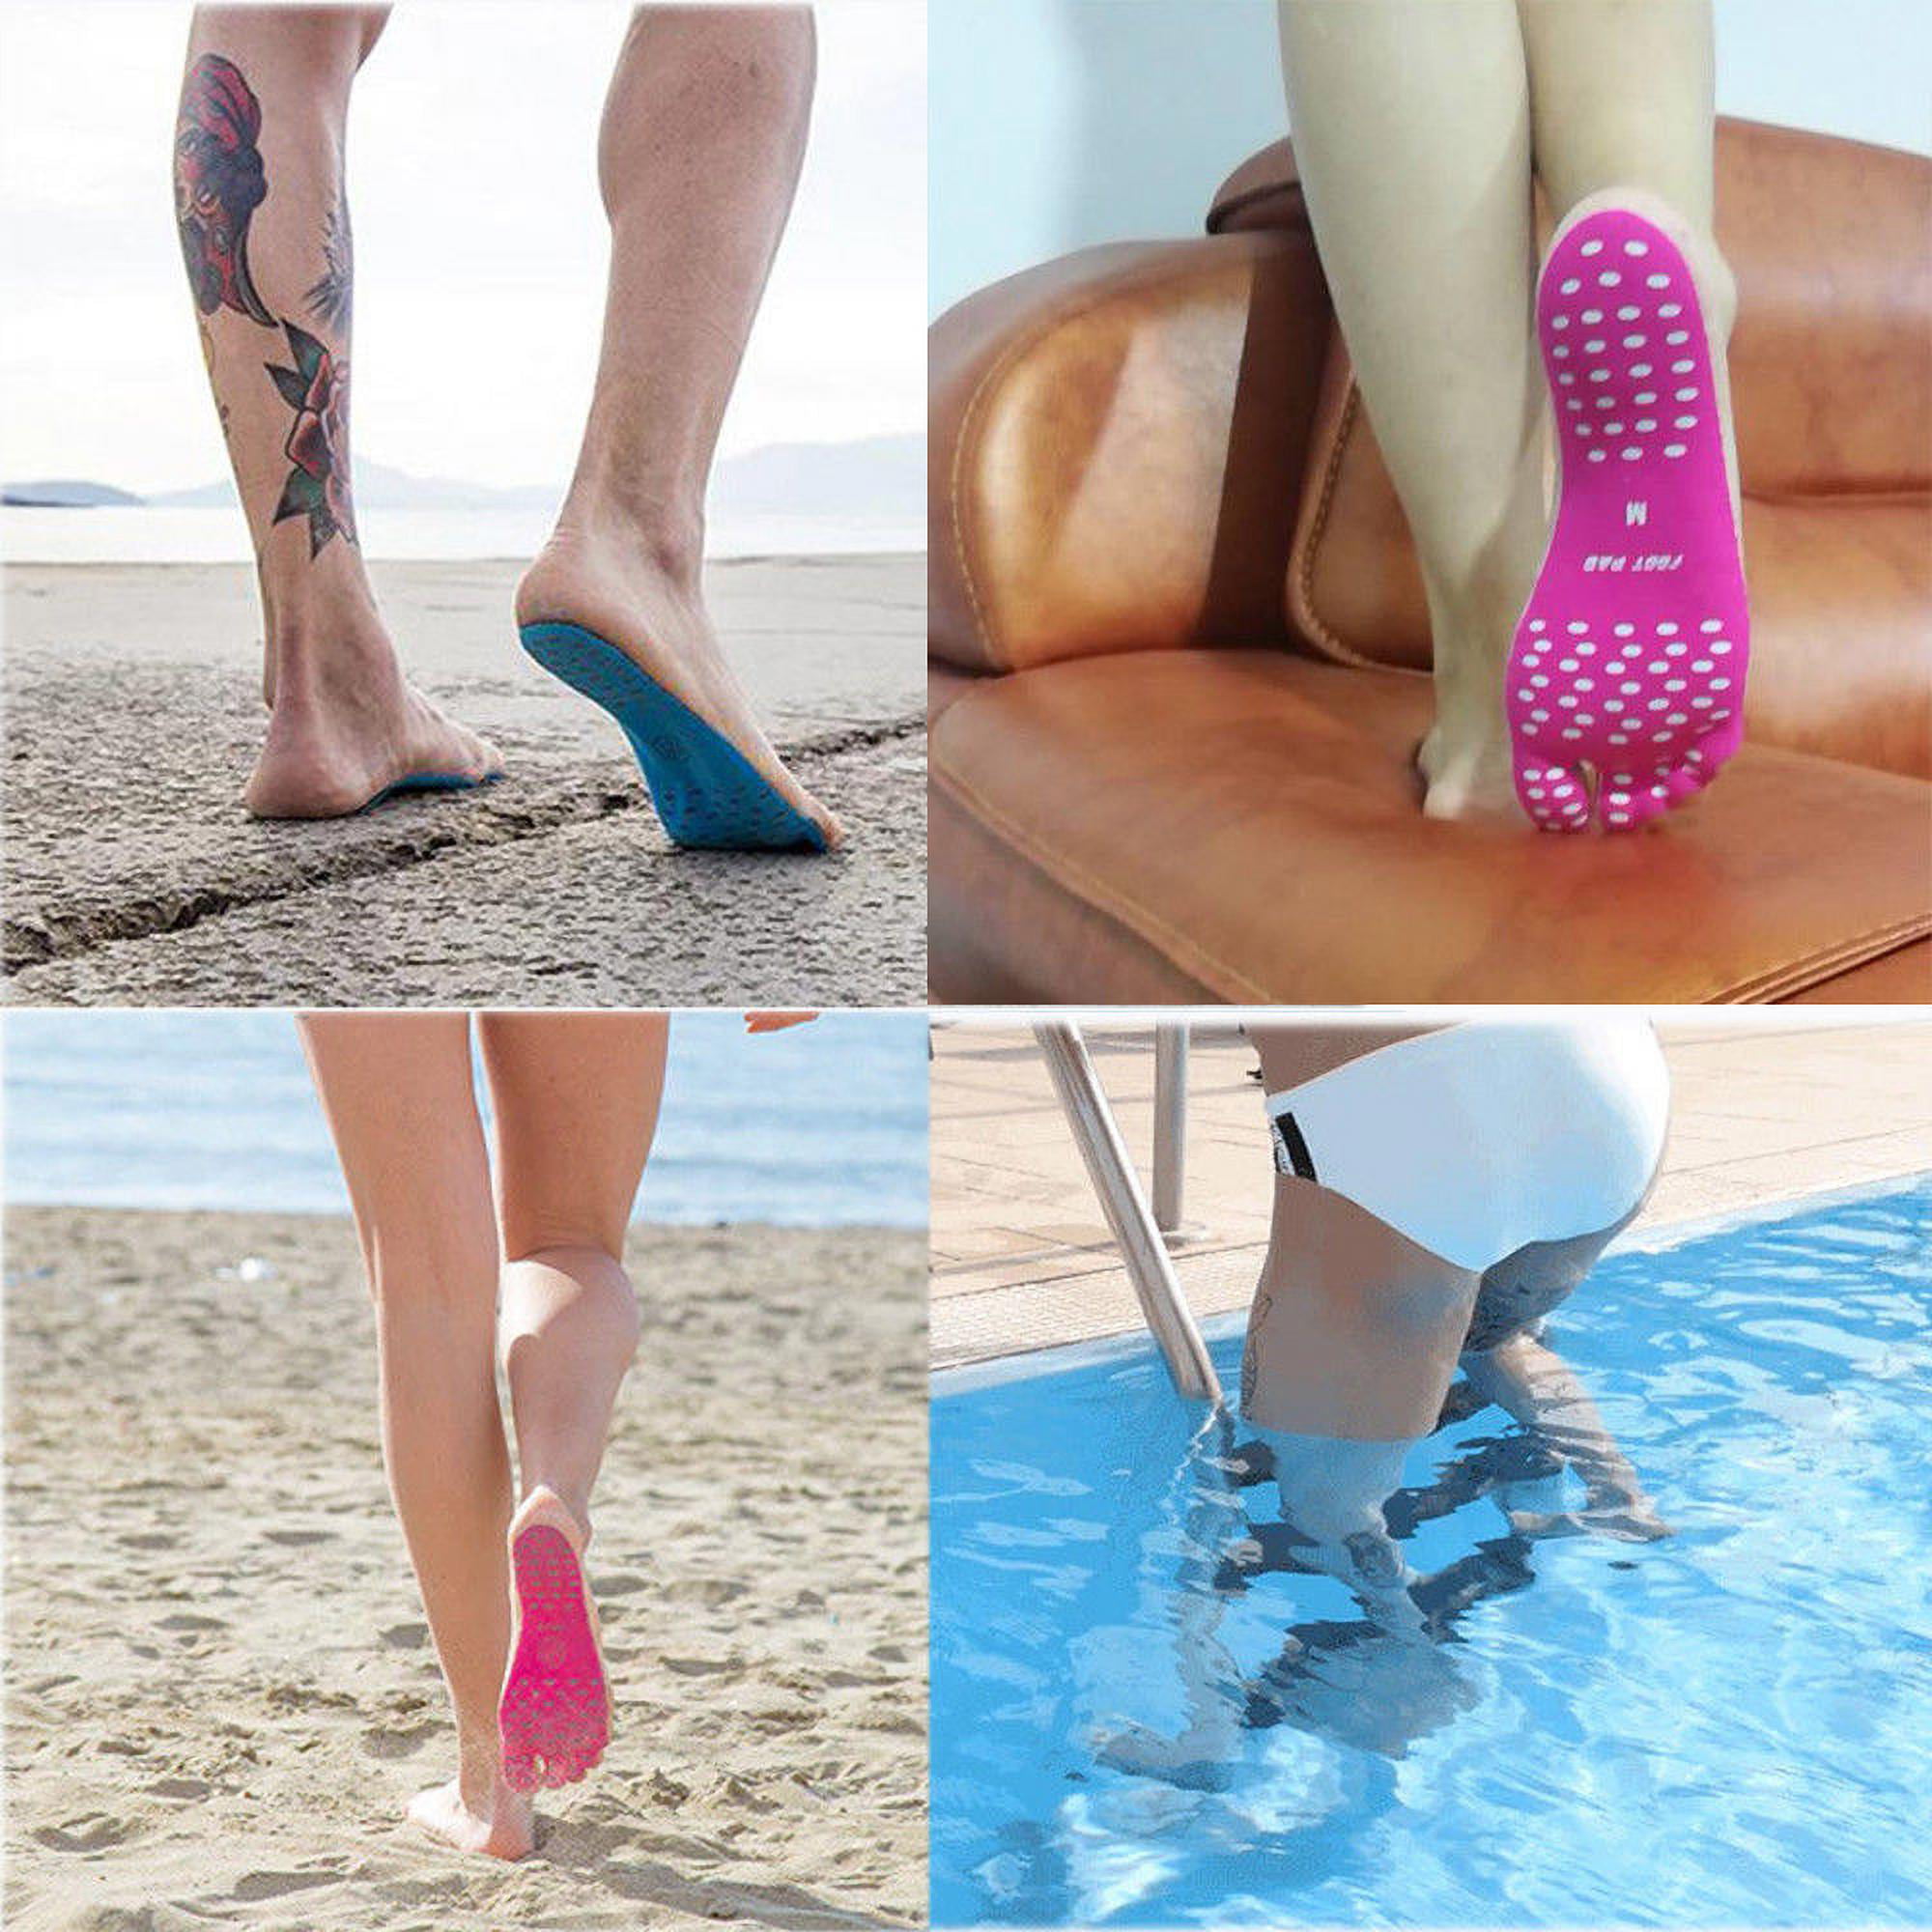 2018 Sticker Shoes Stick on Soles Sticky Pads for Feet Beach Foot Protection Mat 